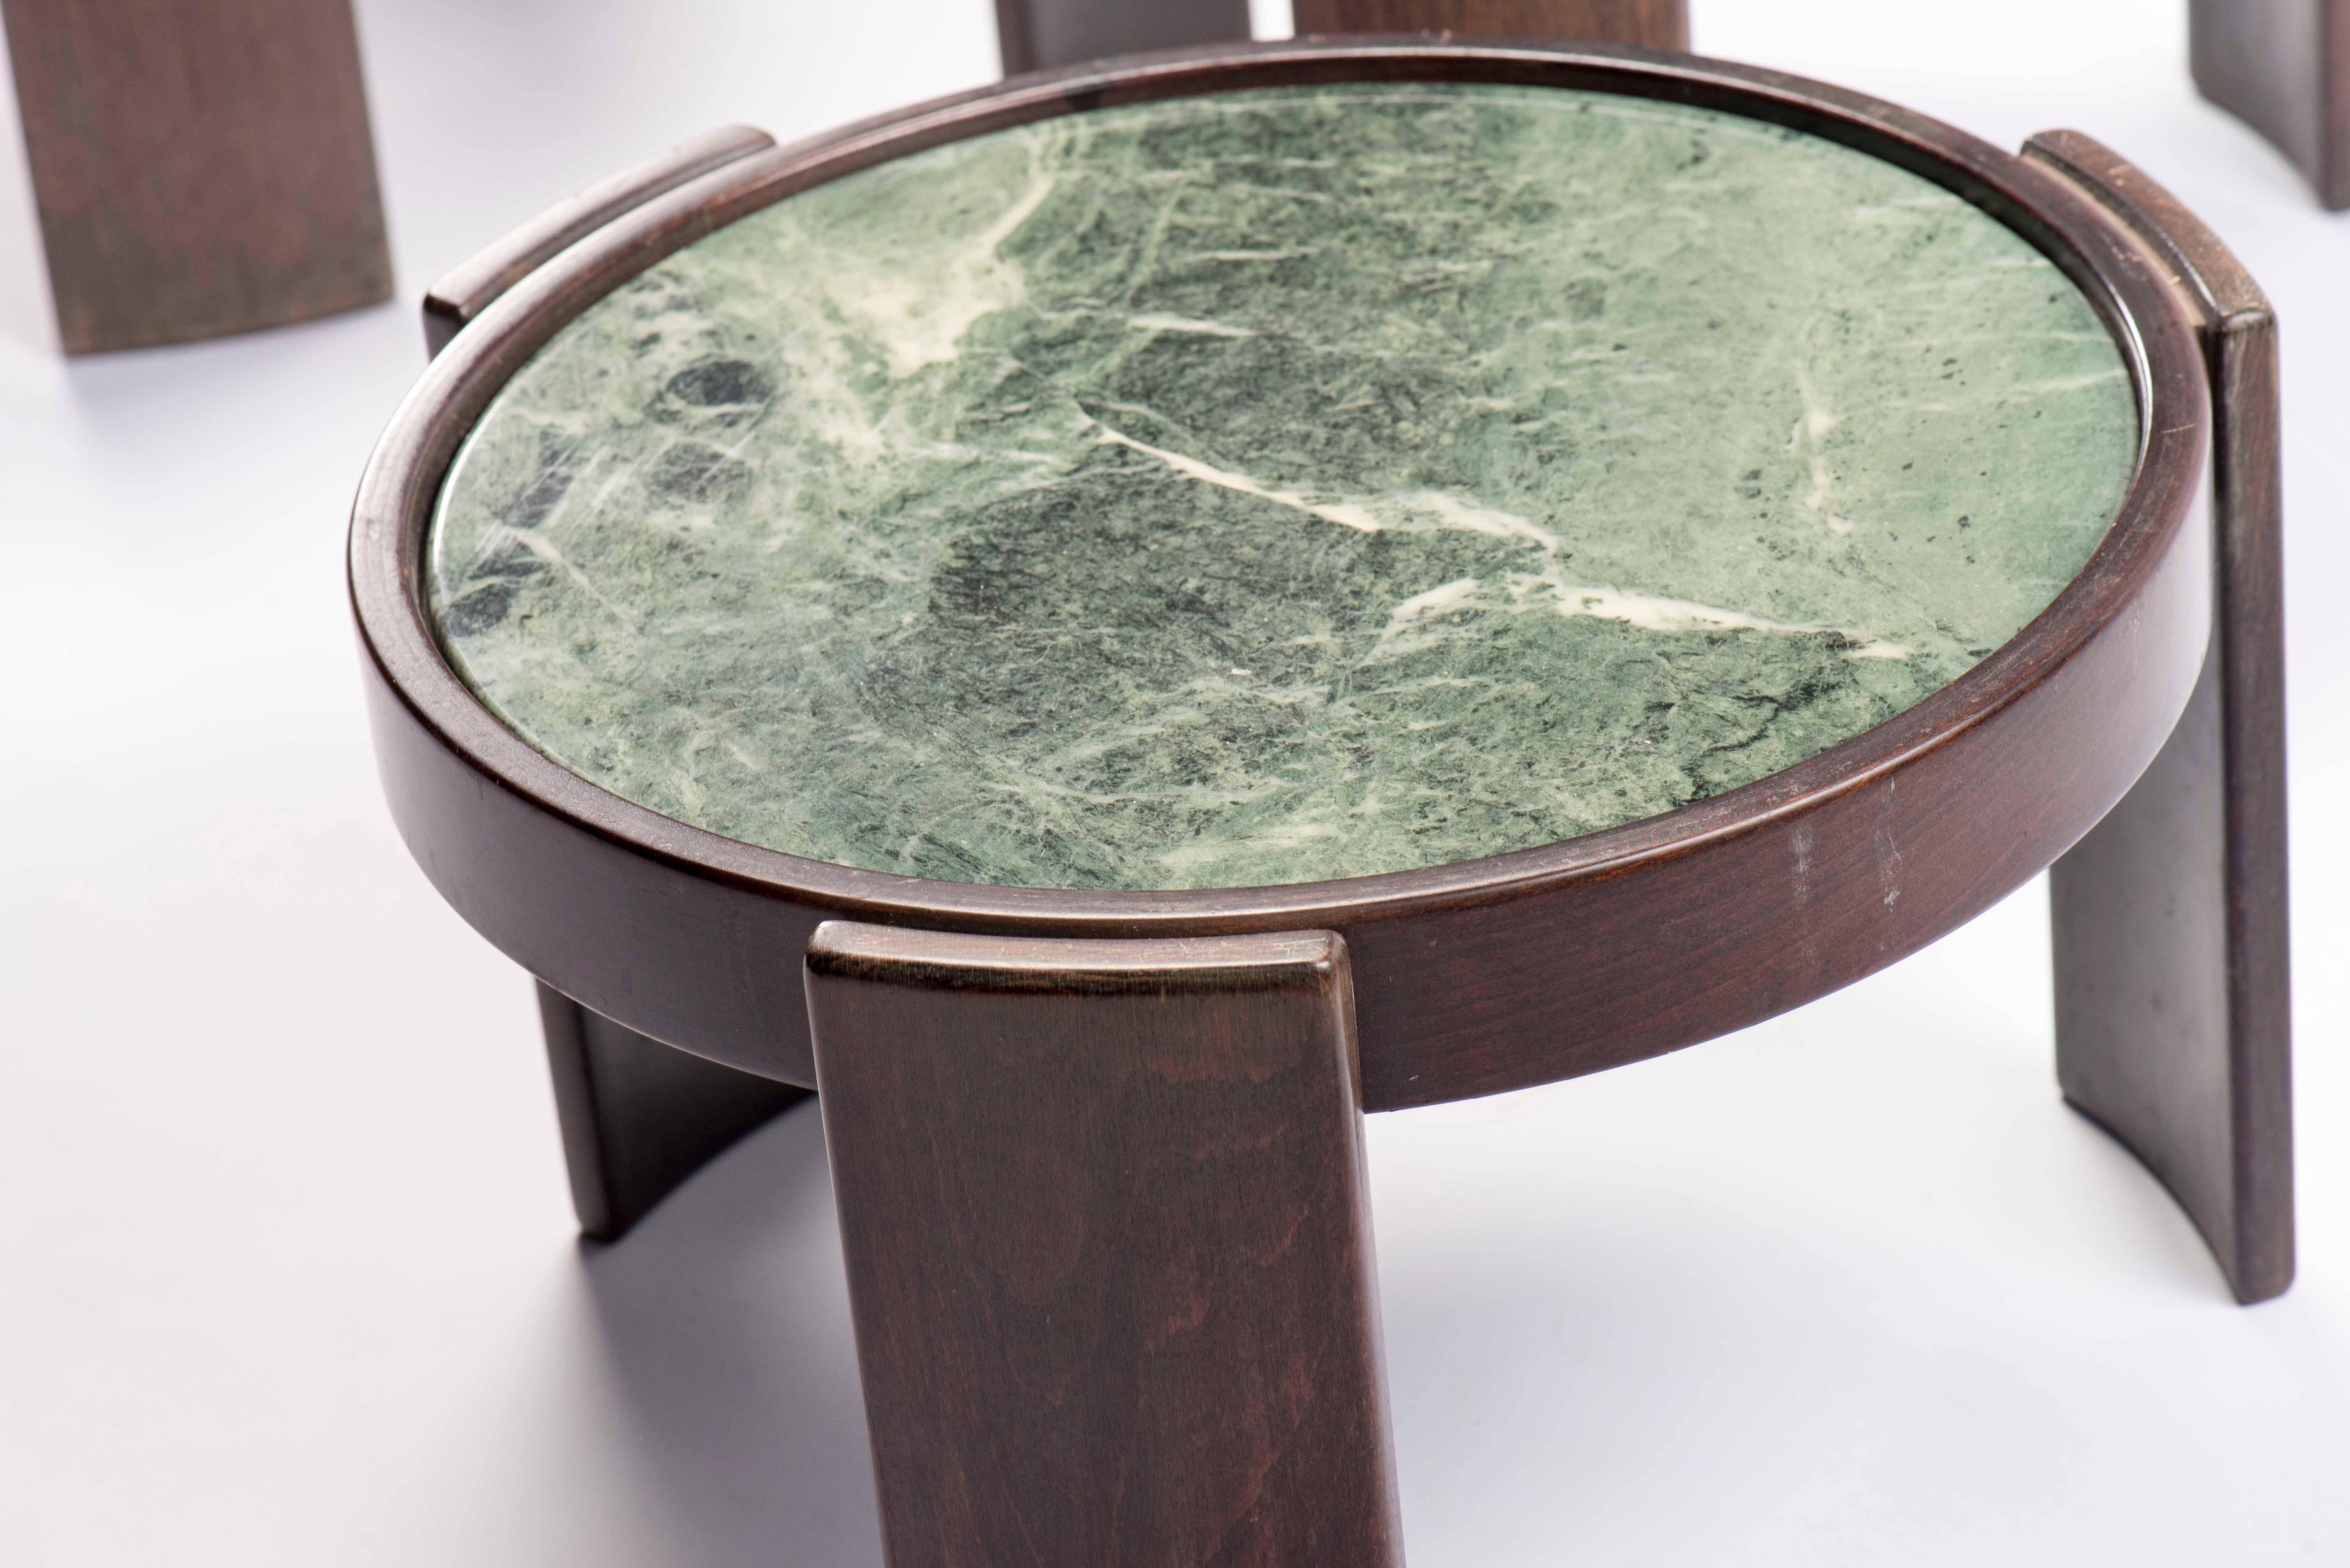 An amazing set of vintage Frattini stacking side tables with rare custom green marble tops. These tables were part of the original decor of a Marcel Breuer designed home.